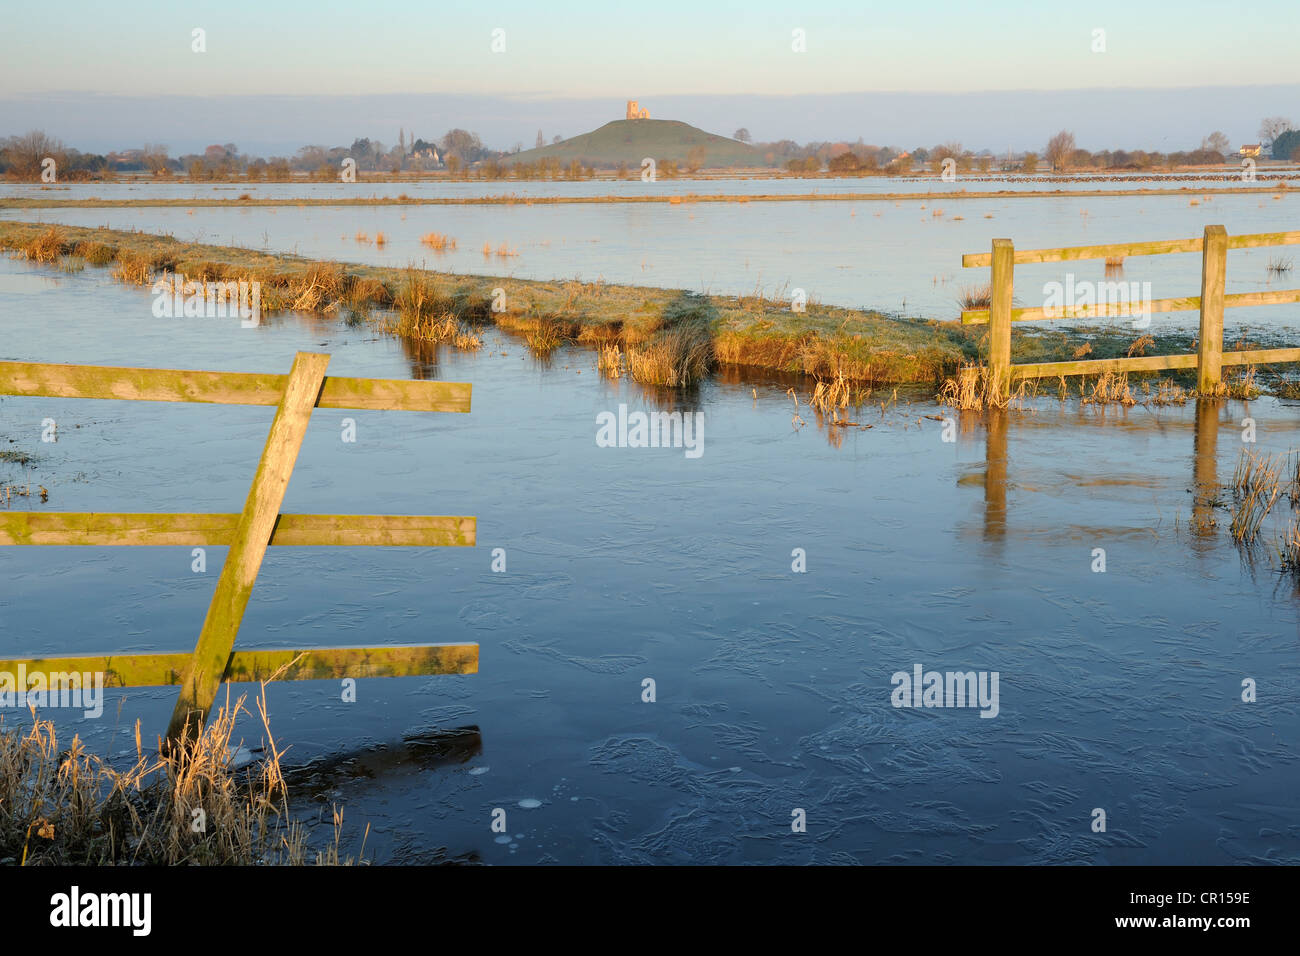 Flooded fields with Burrow Mump in the distance. Burrowbridge, Somerset Levels, UK. Stock Photo